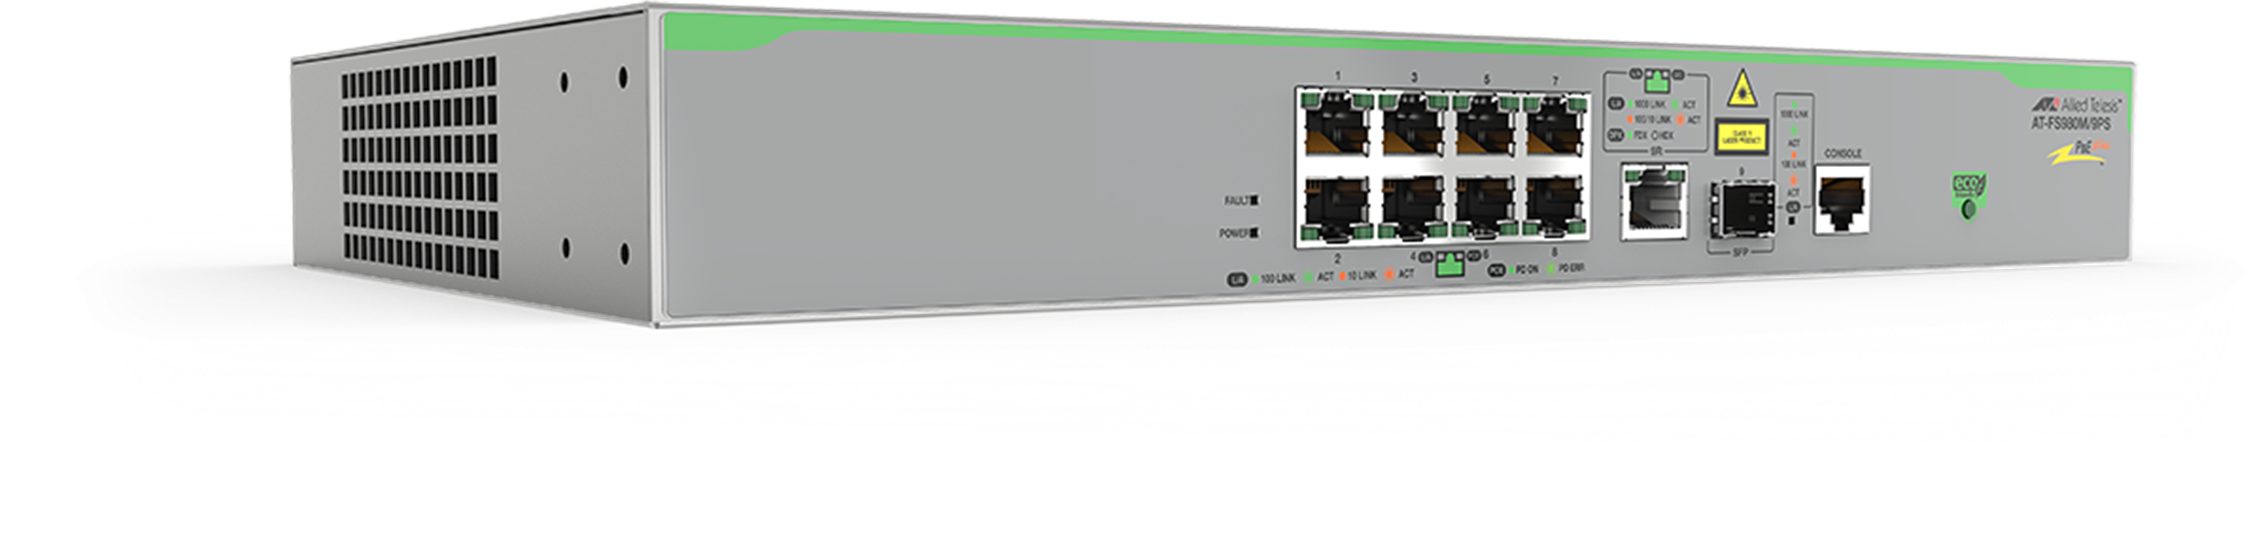 AT-FS980M Series - Layer 2 Fast Ethernet Switch